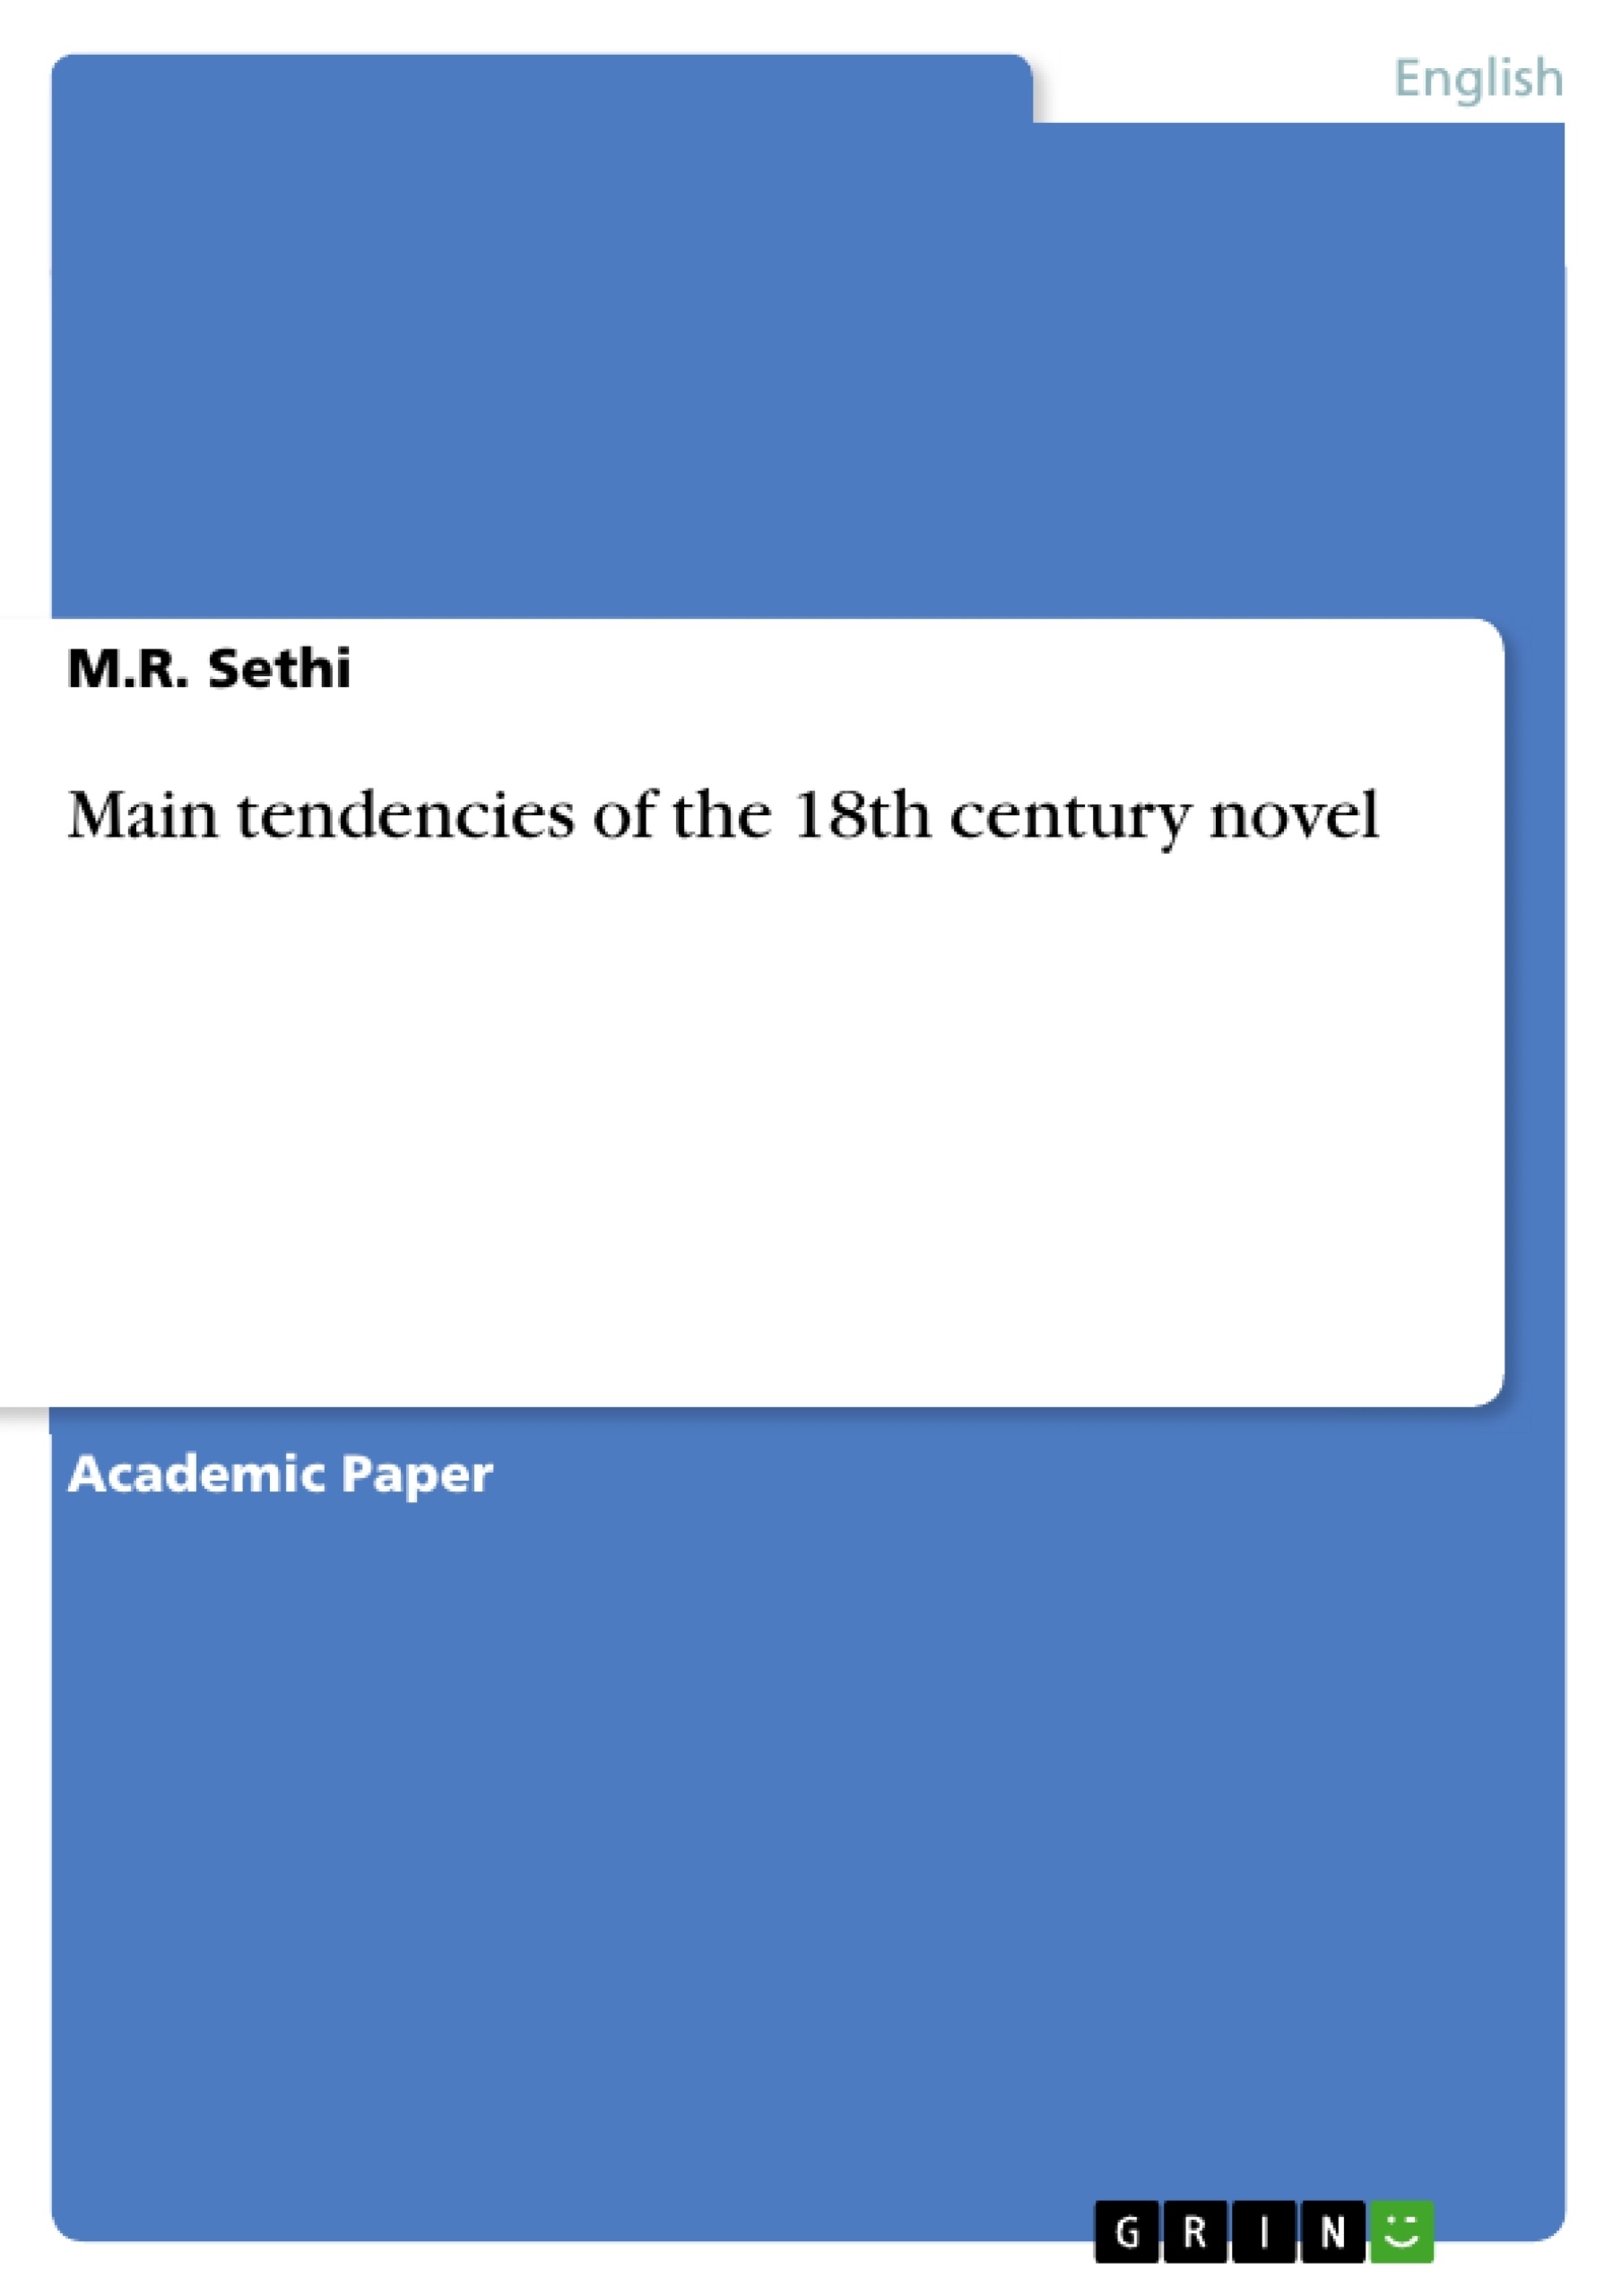 Title: Main tendencies of the 18th century novel